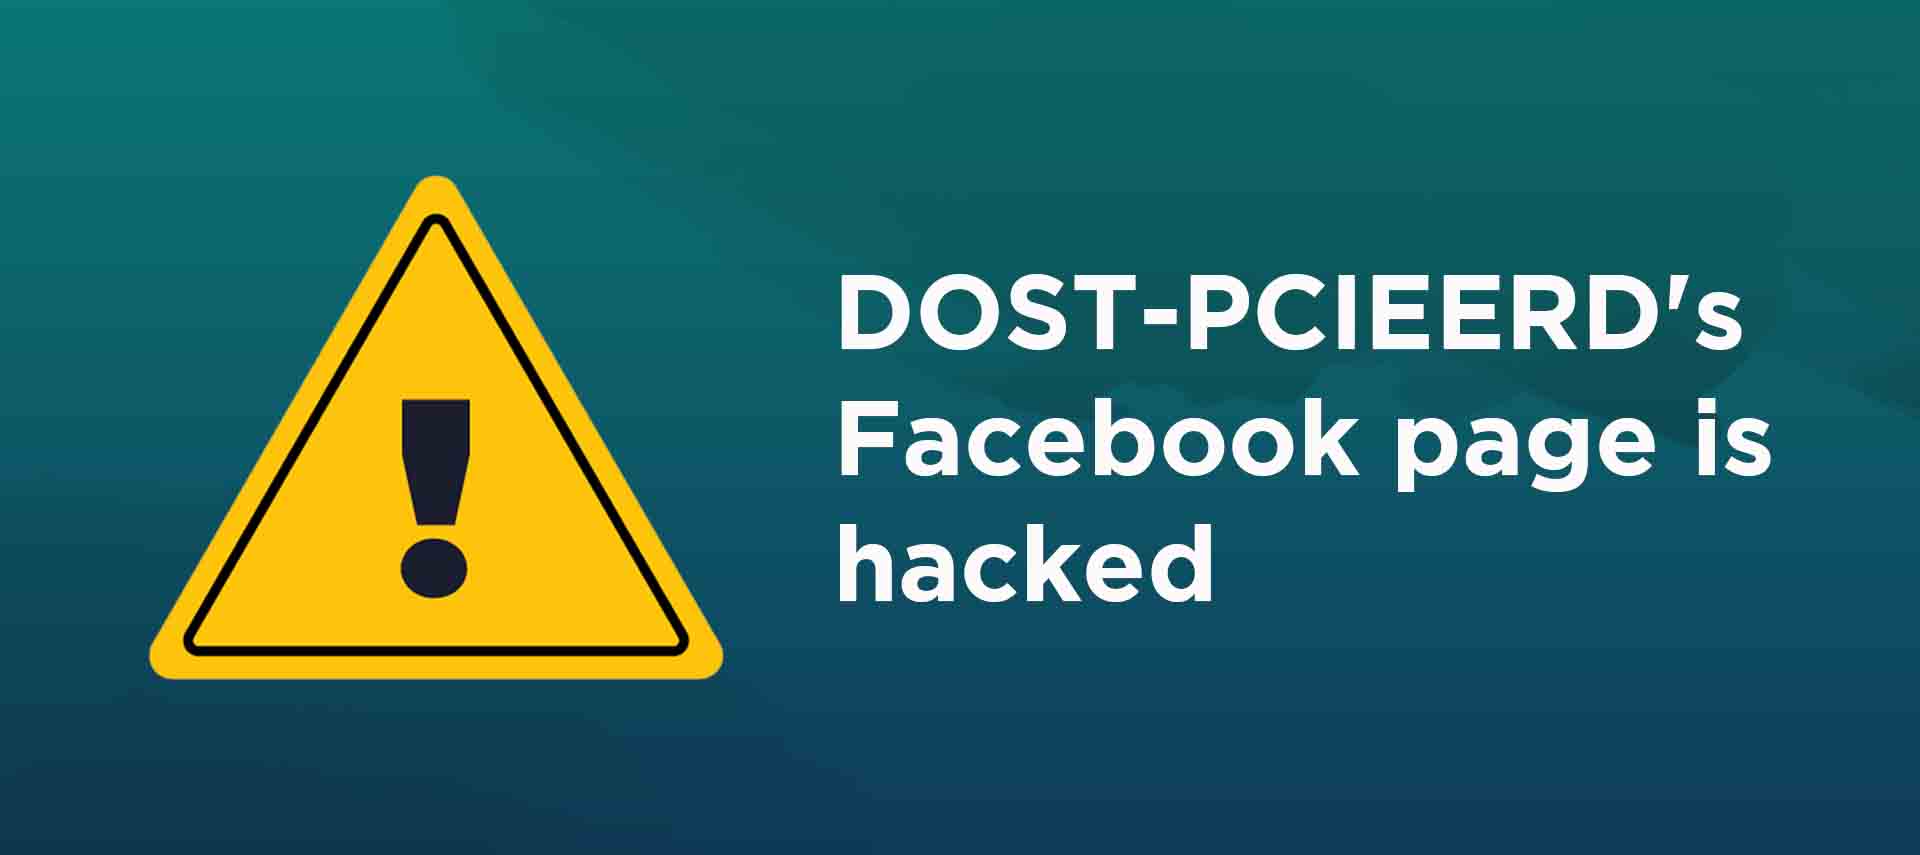 PCIEERD FB Page Hacked Cover Photo